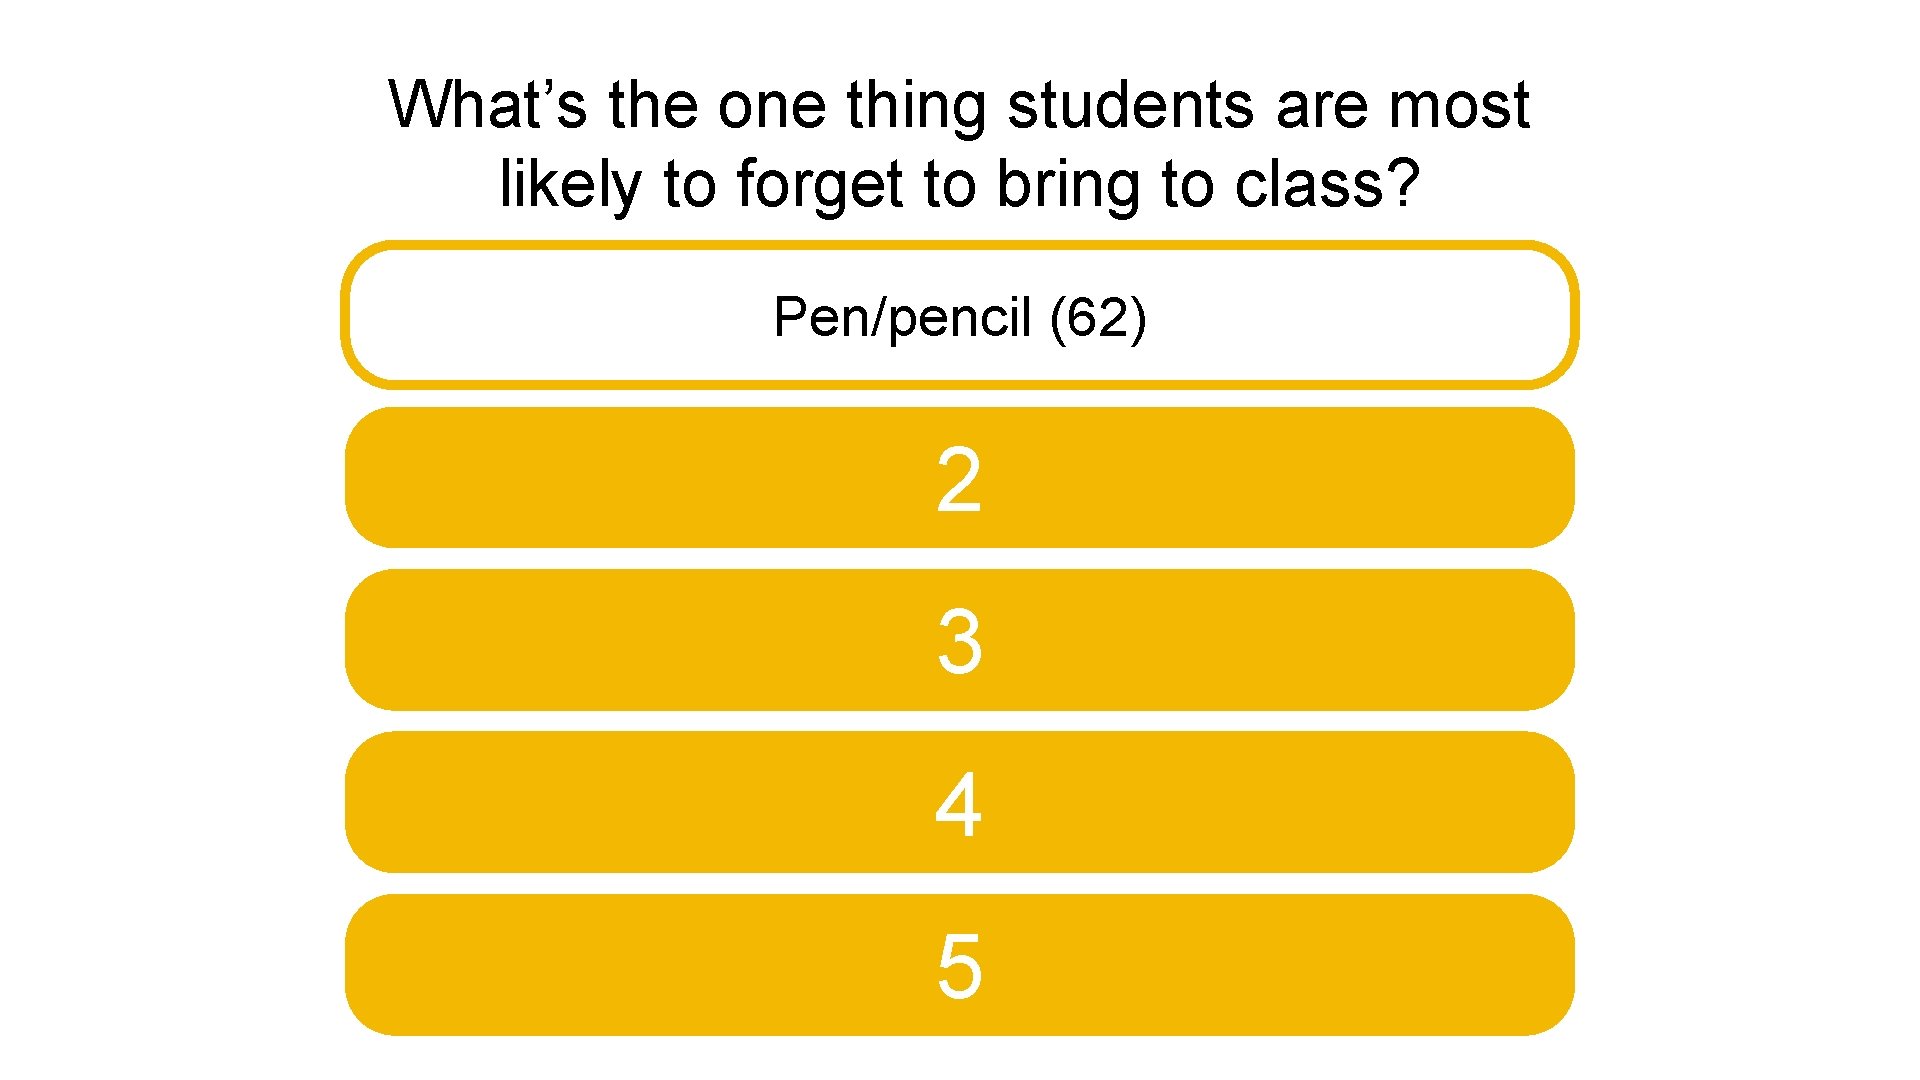 What’s the one thing students are most likely to forget to bring to class?